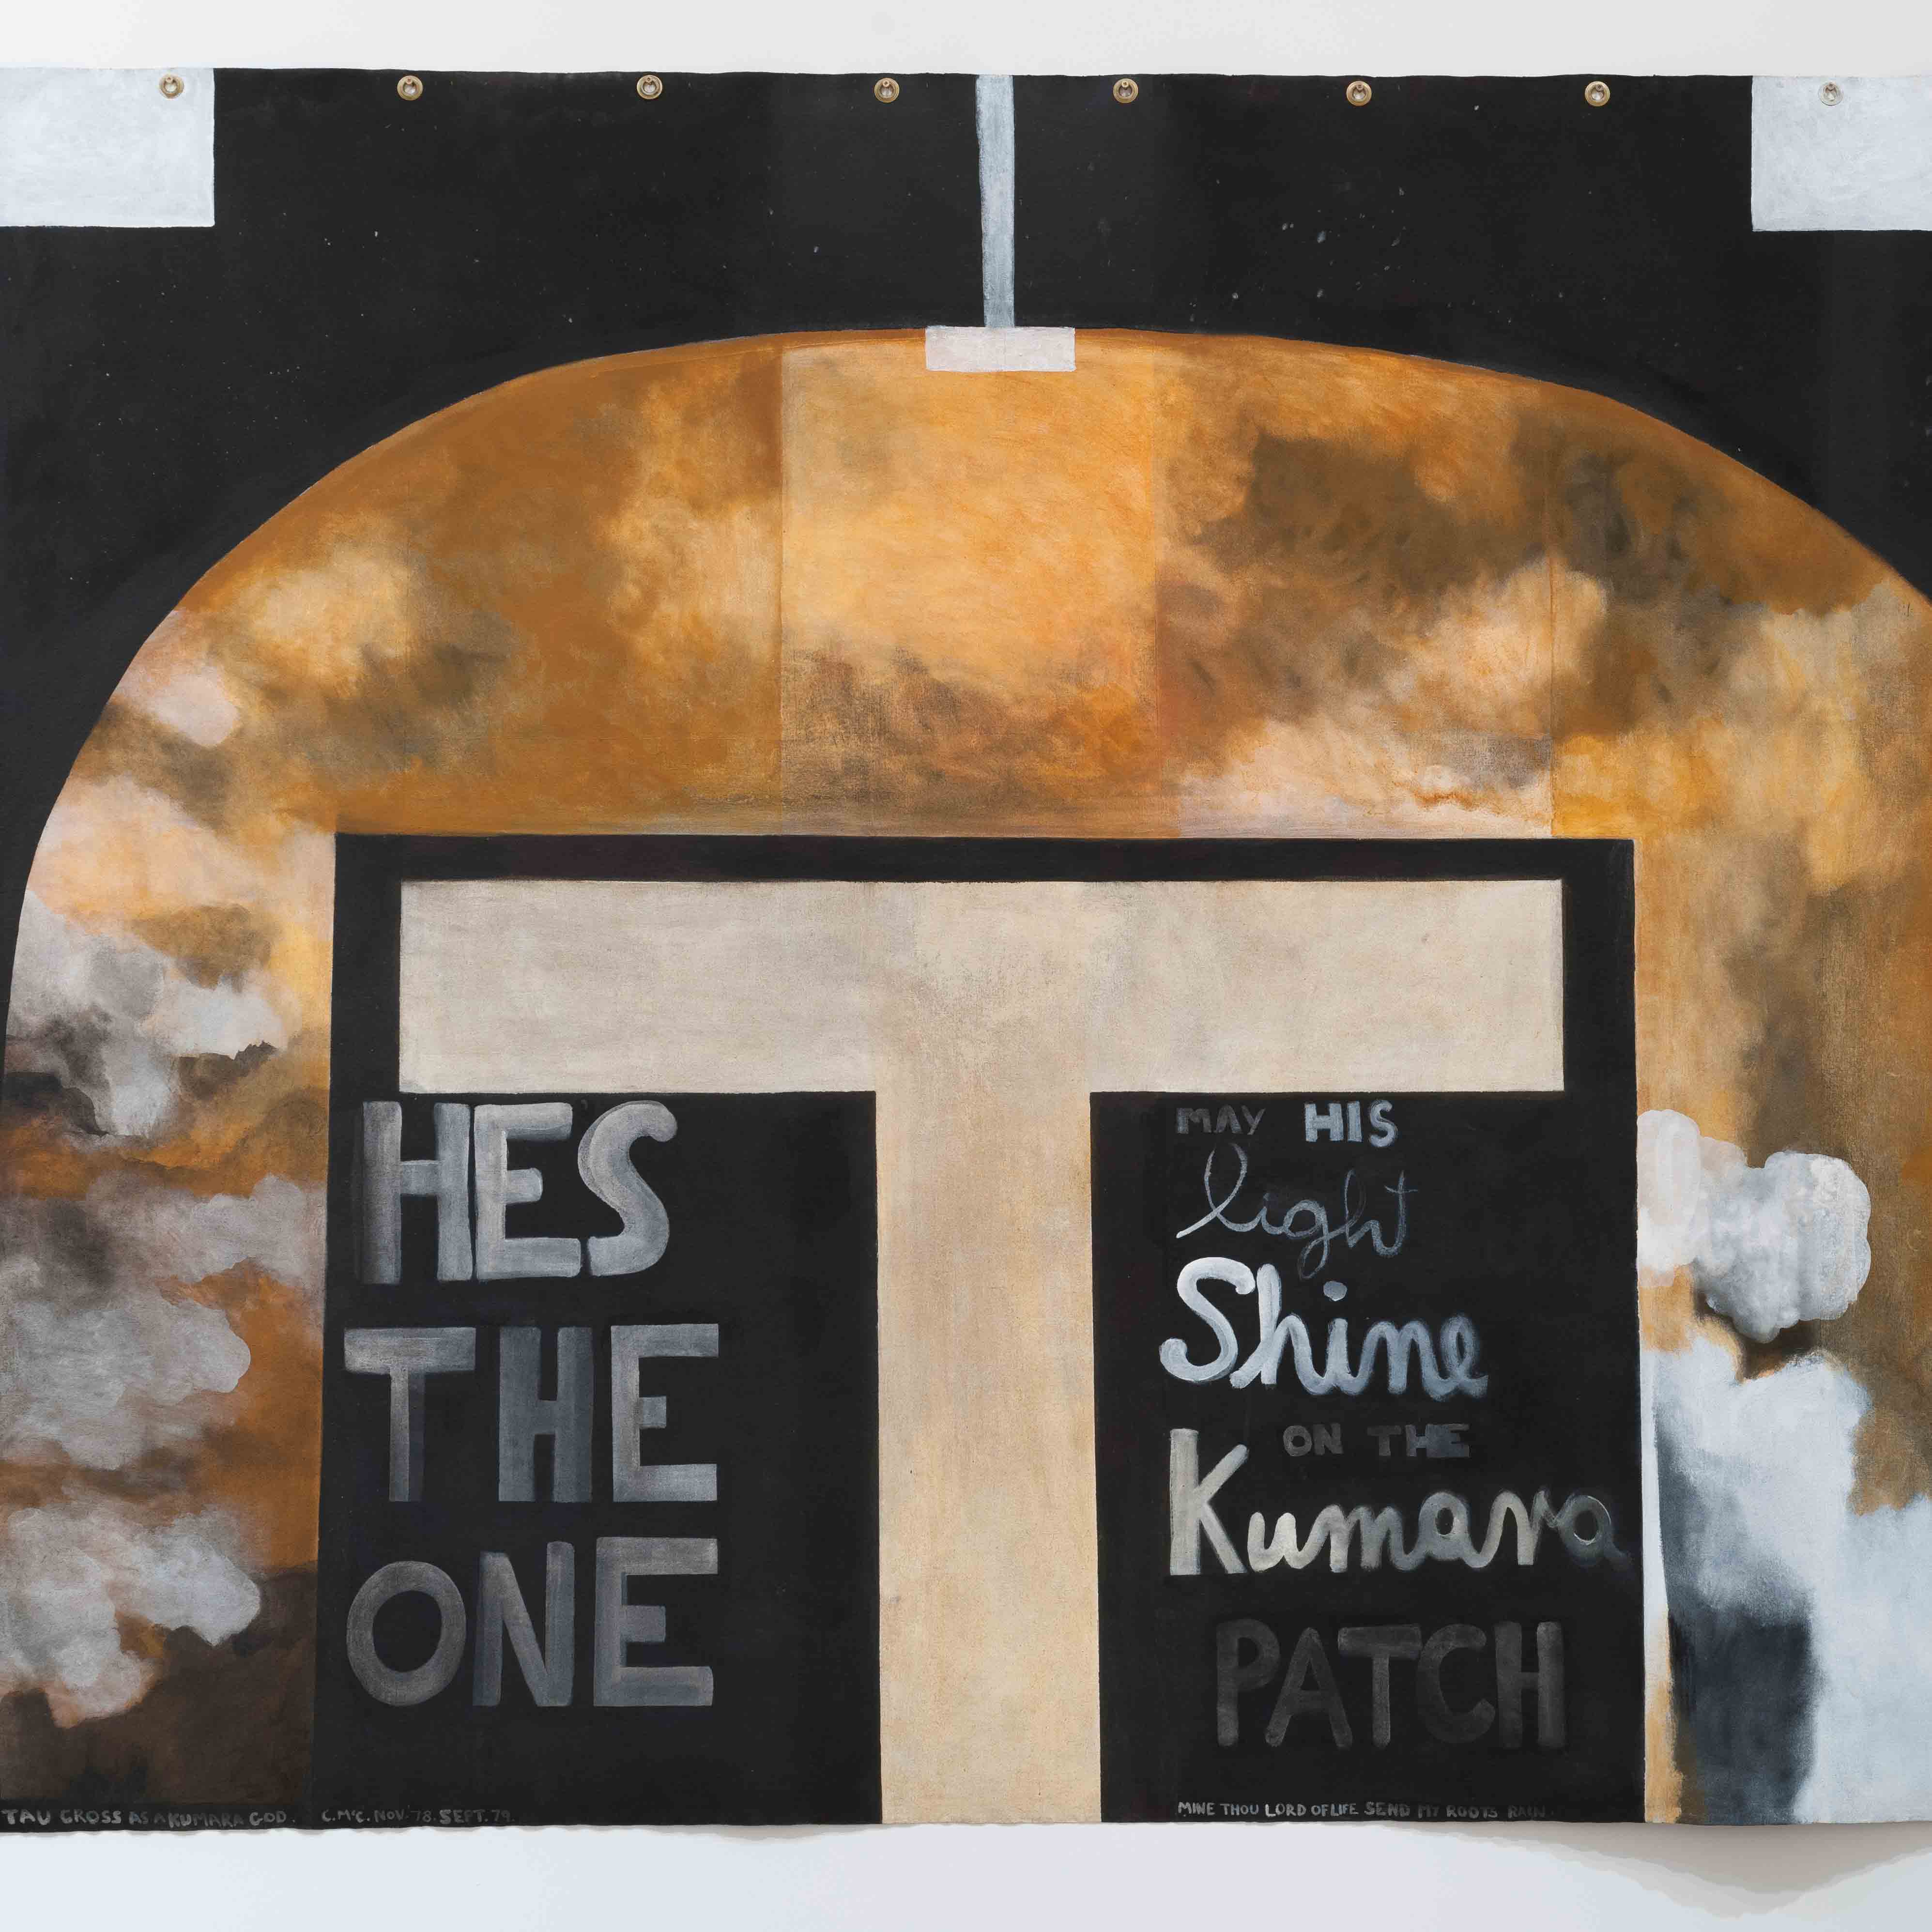 A Place to Paint: Colin McCahon in Auckland  Opens Saturday 10 August at Auckland Art Gallery